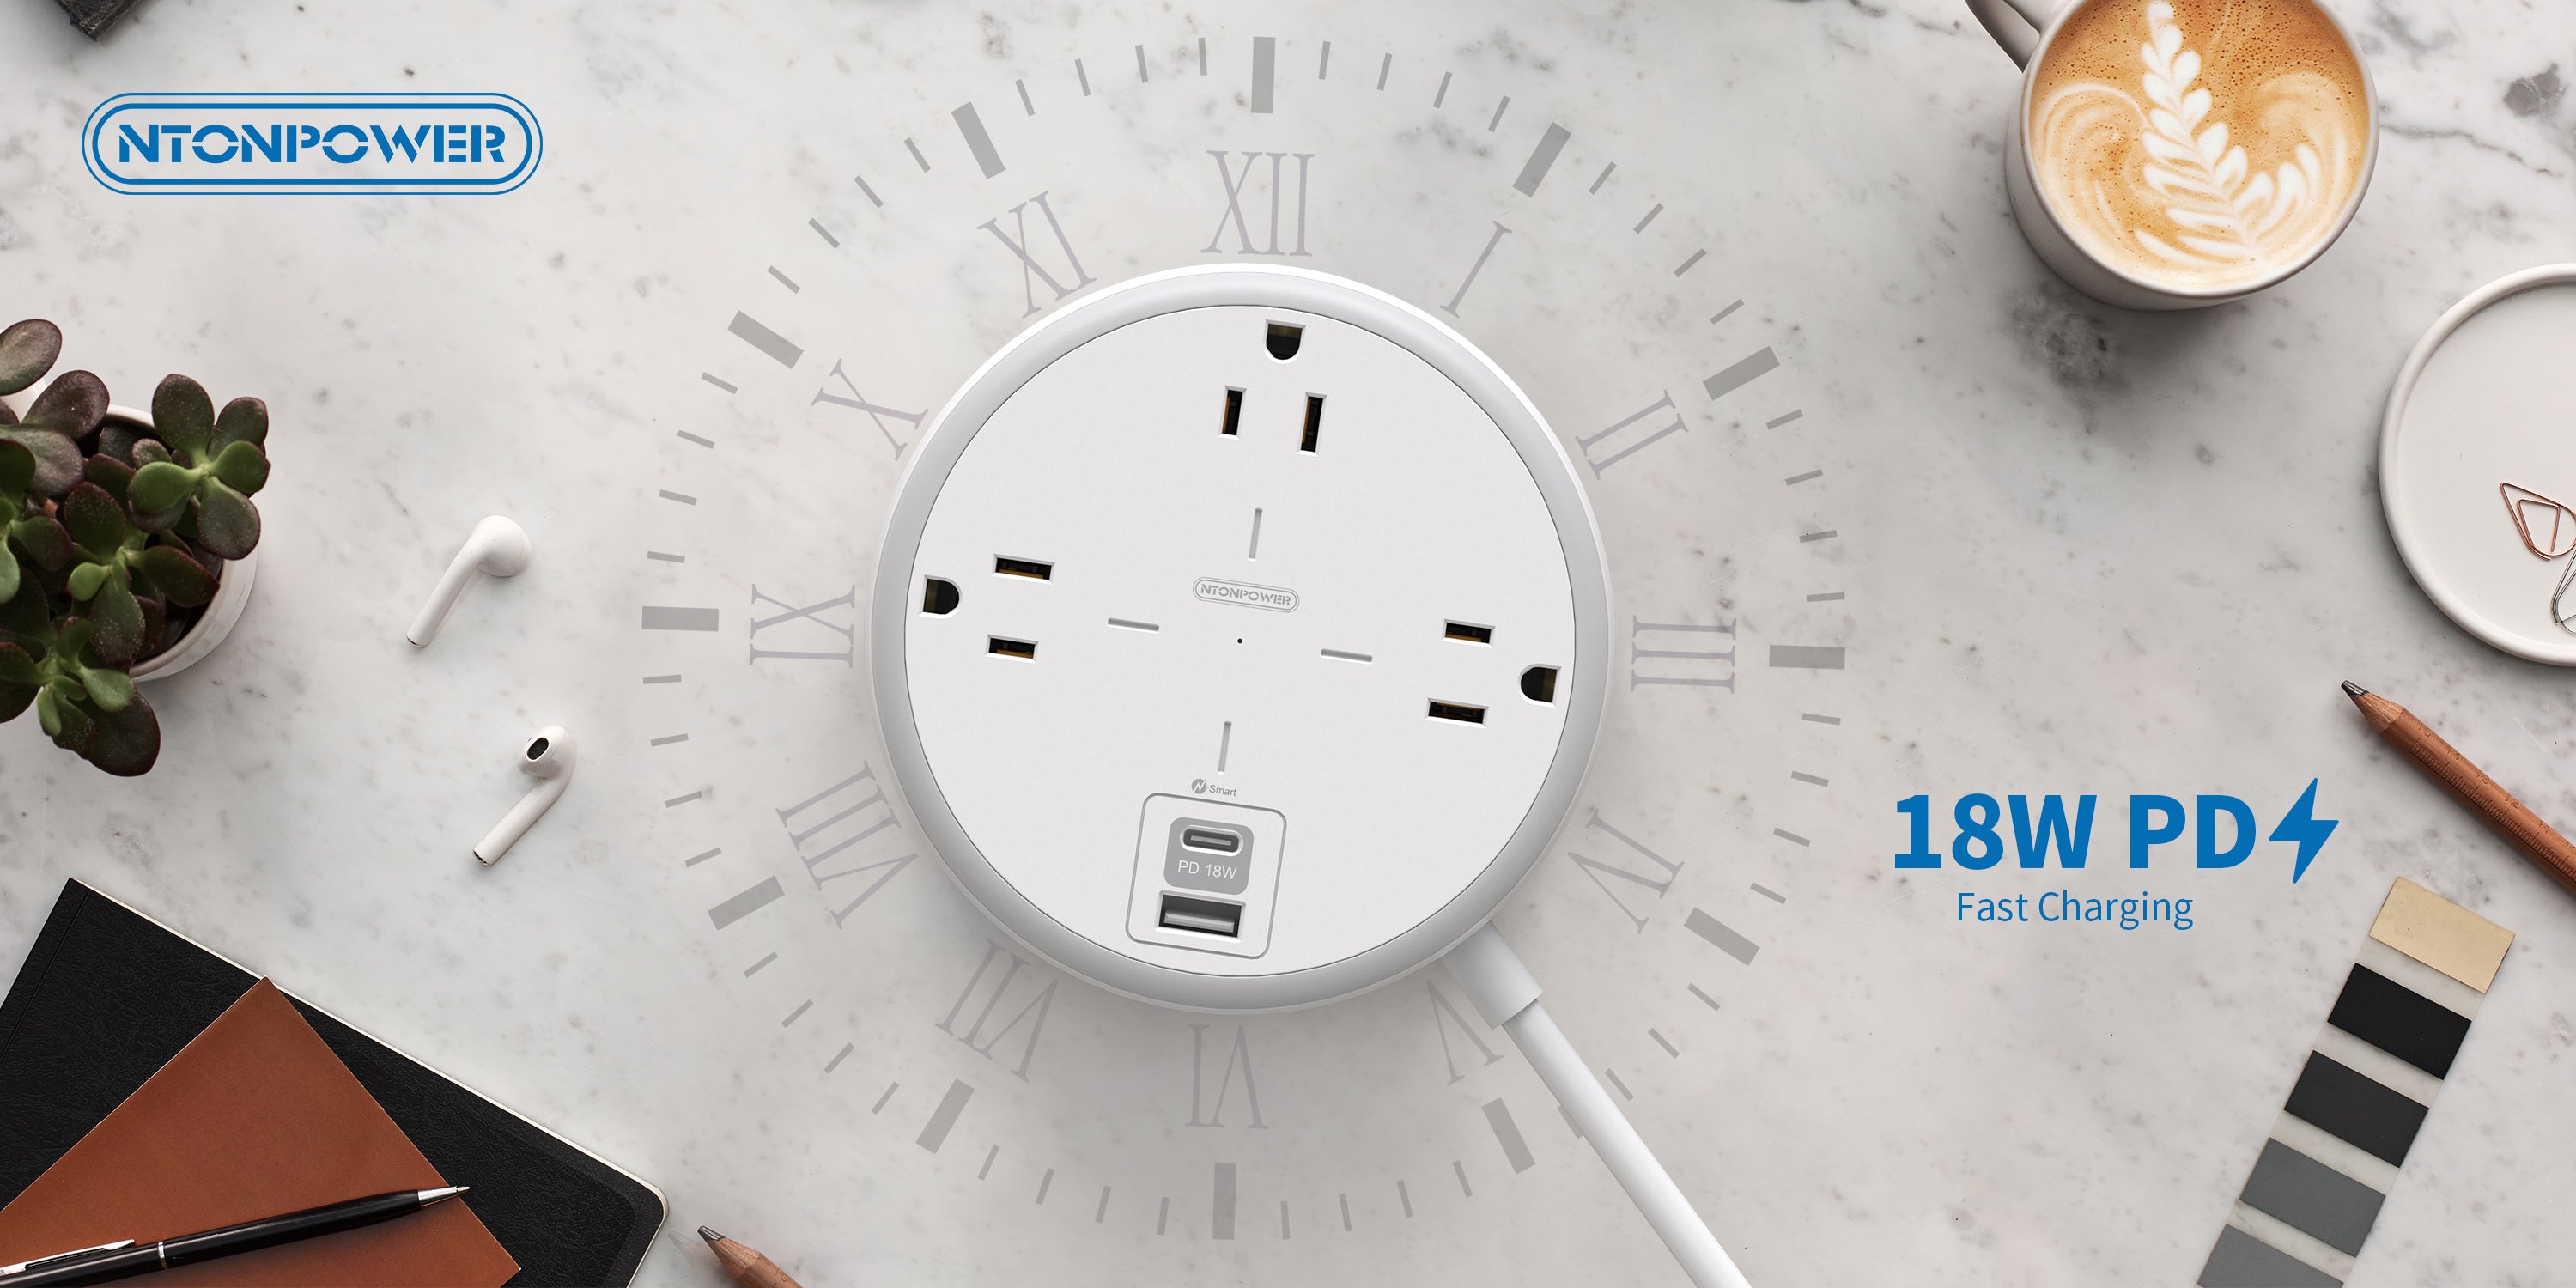 Essential for Home Office: NTONPOWER Launches a Portable Fast-charging USB-C Power Strip